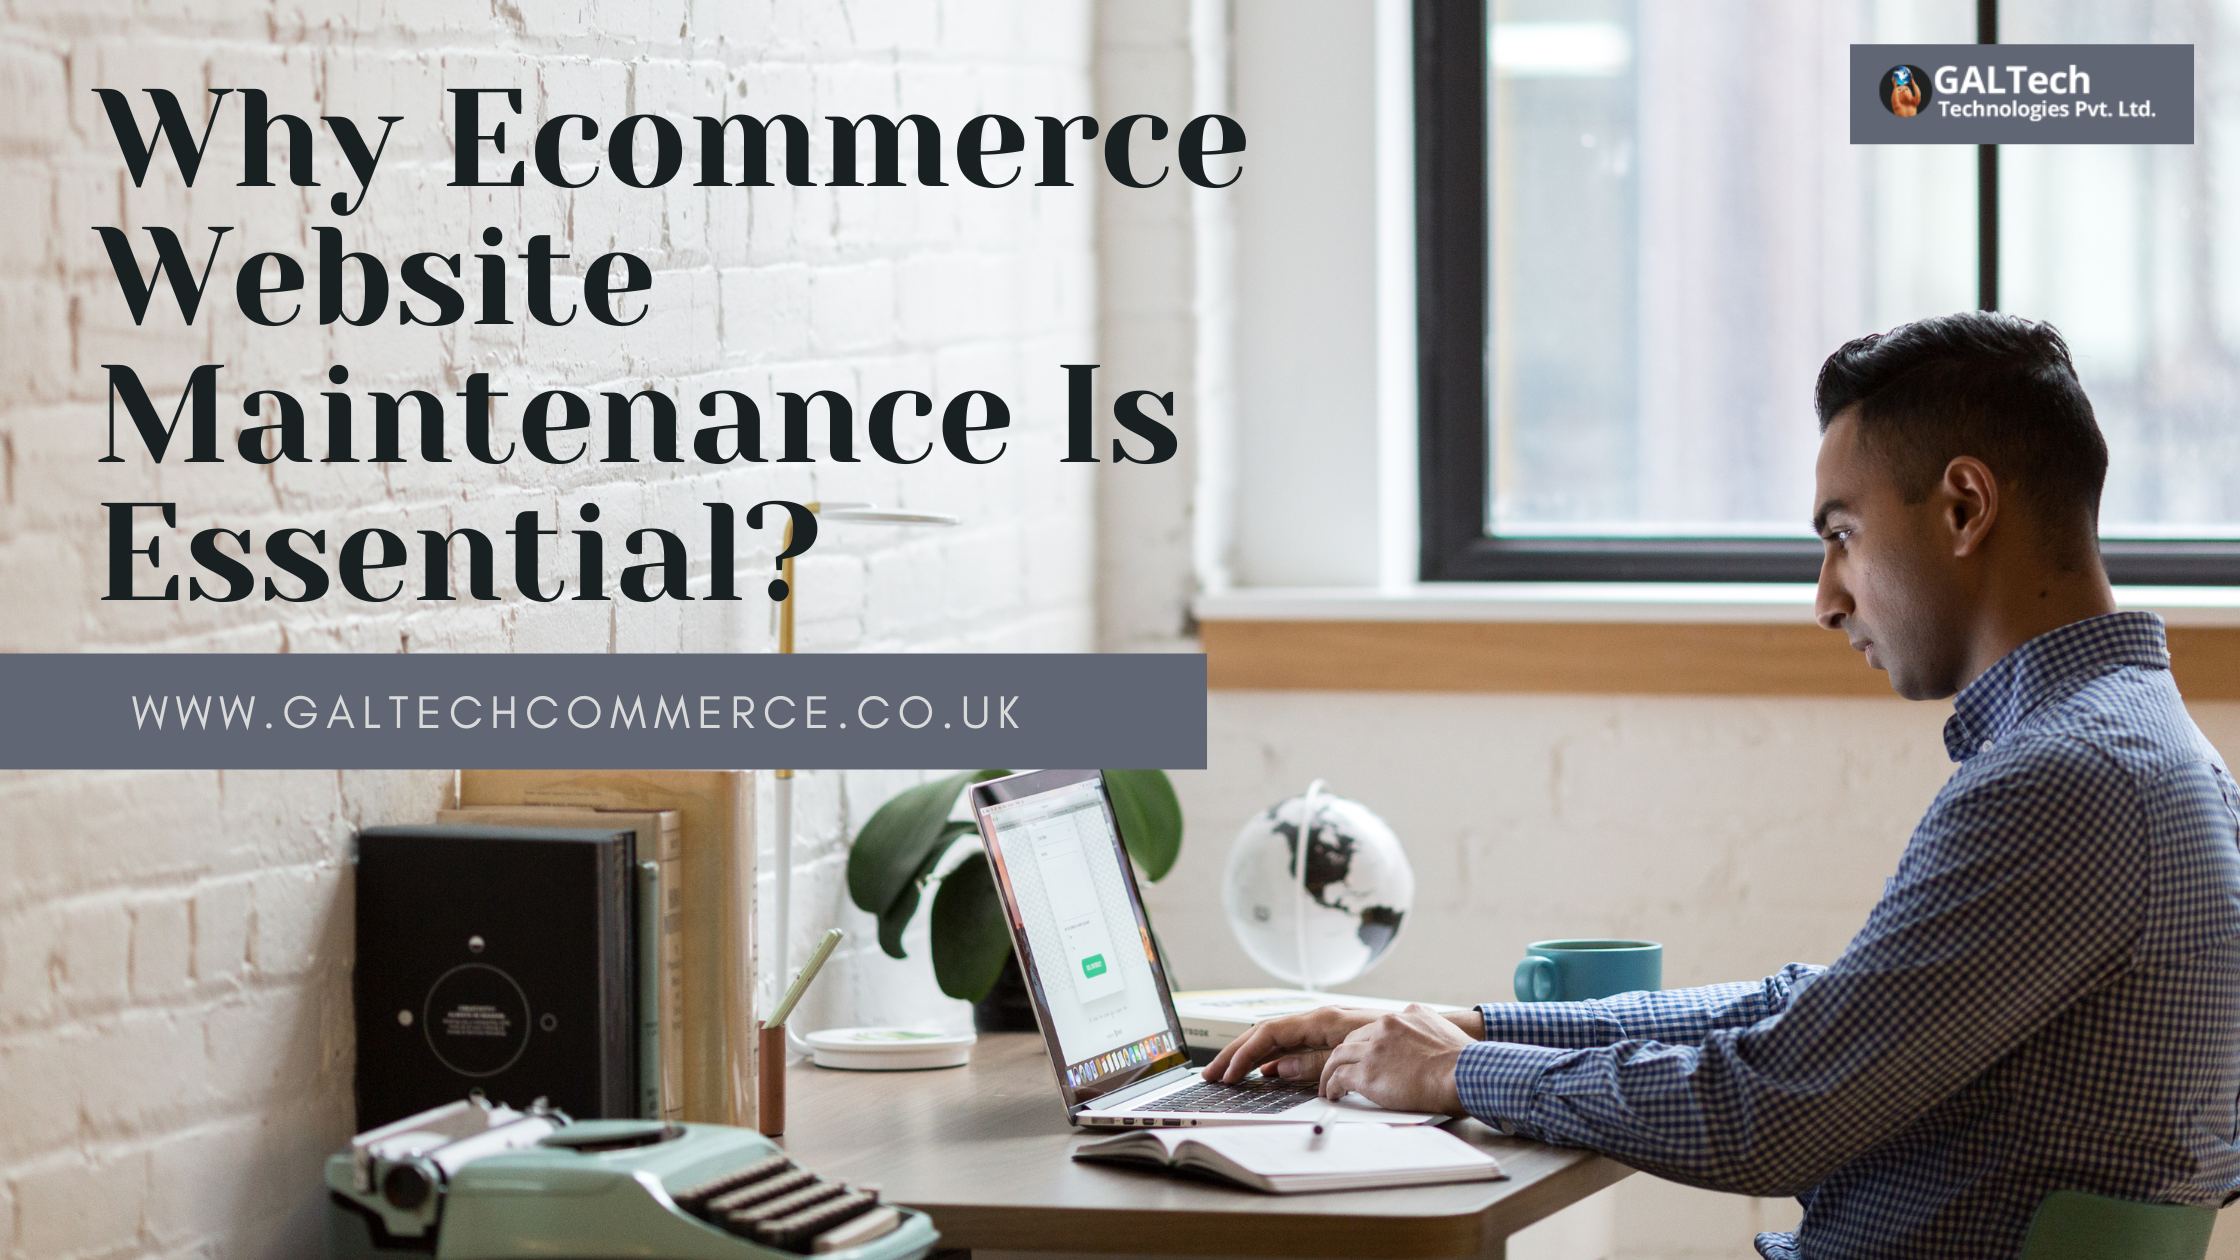 Why Ecommerce Website Maintenance Is Essential?